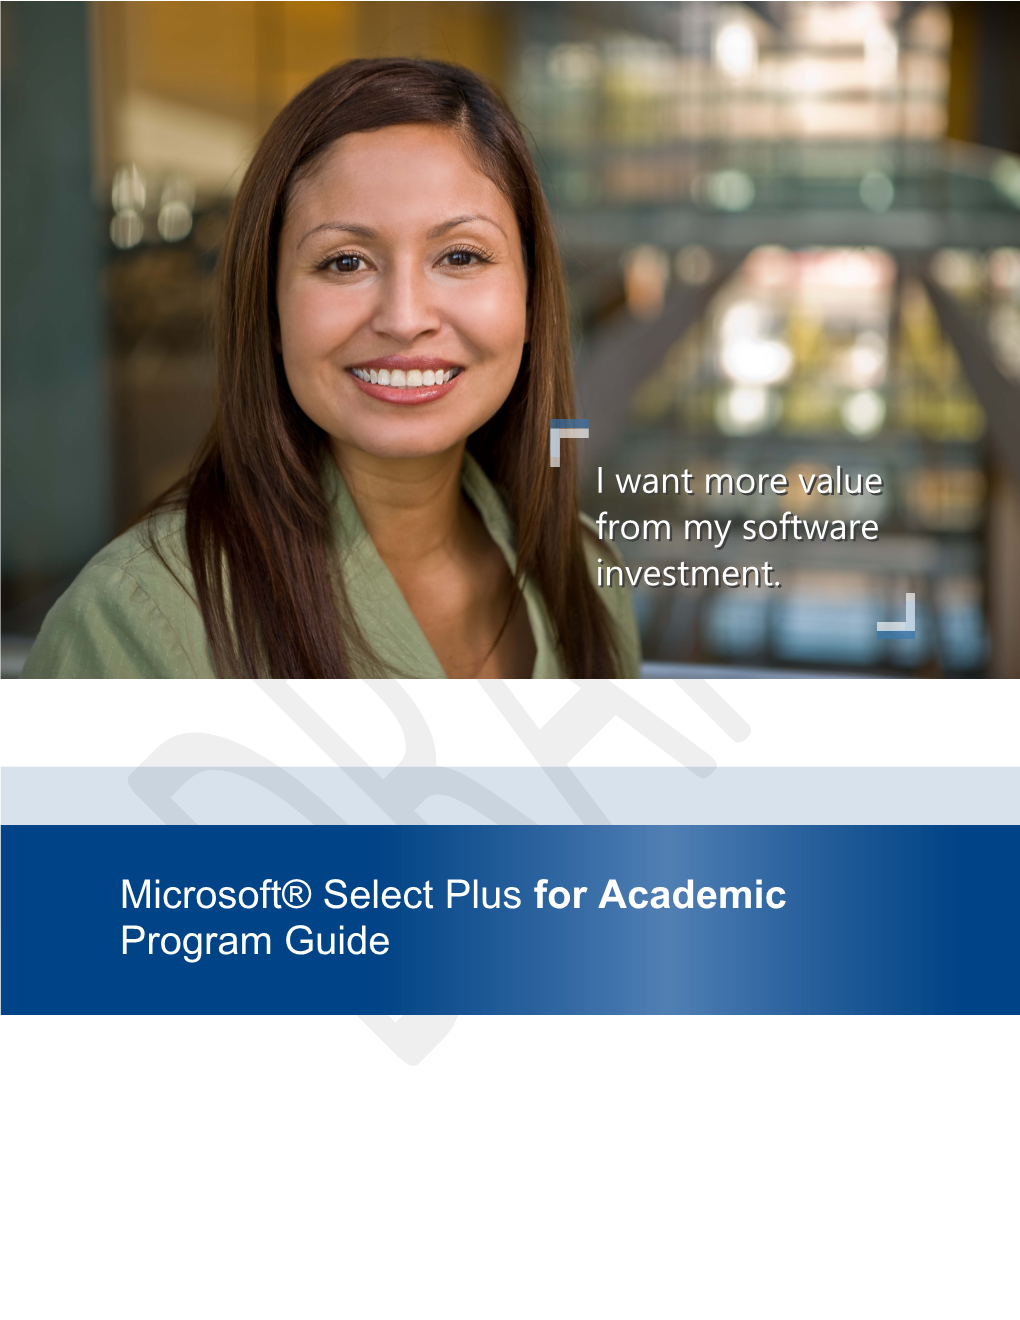 Select Plus for Academic Overview and Benefits